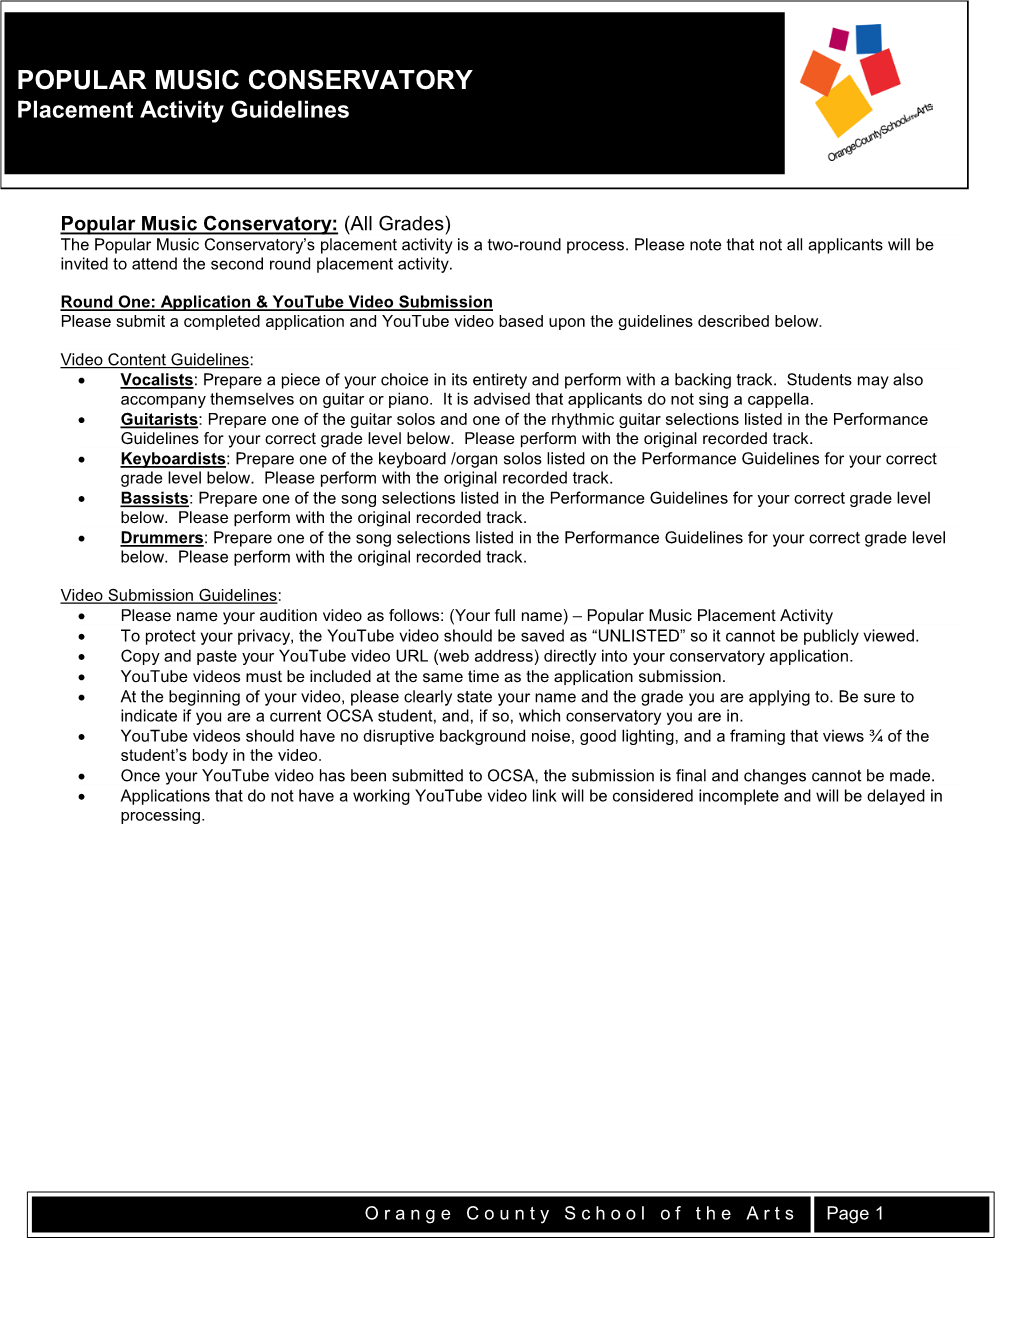 POPULAR MUSIC CONSERVATORY Placement Activity Guidelines